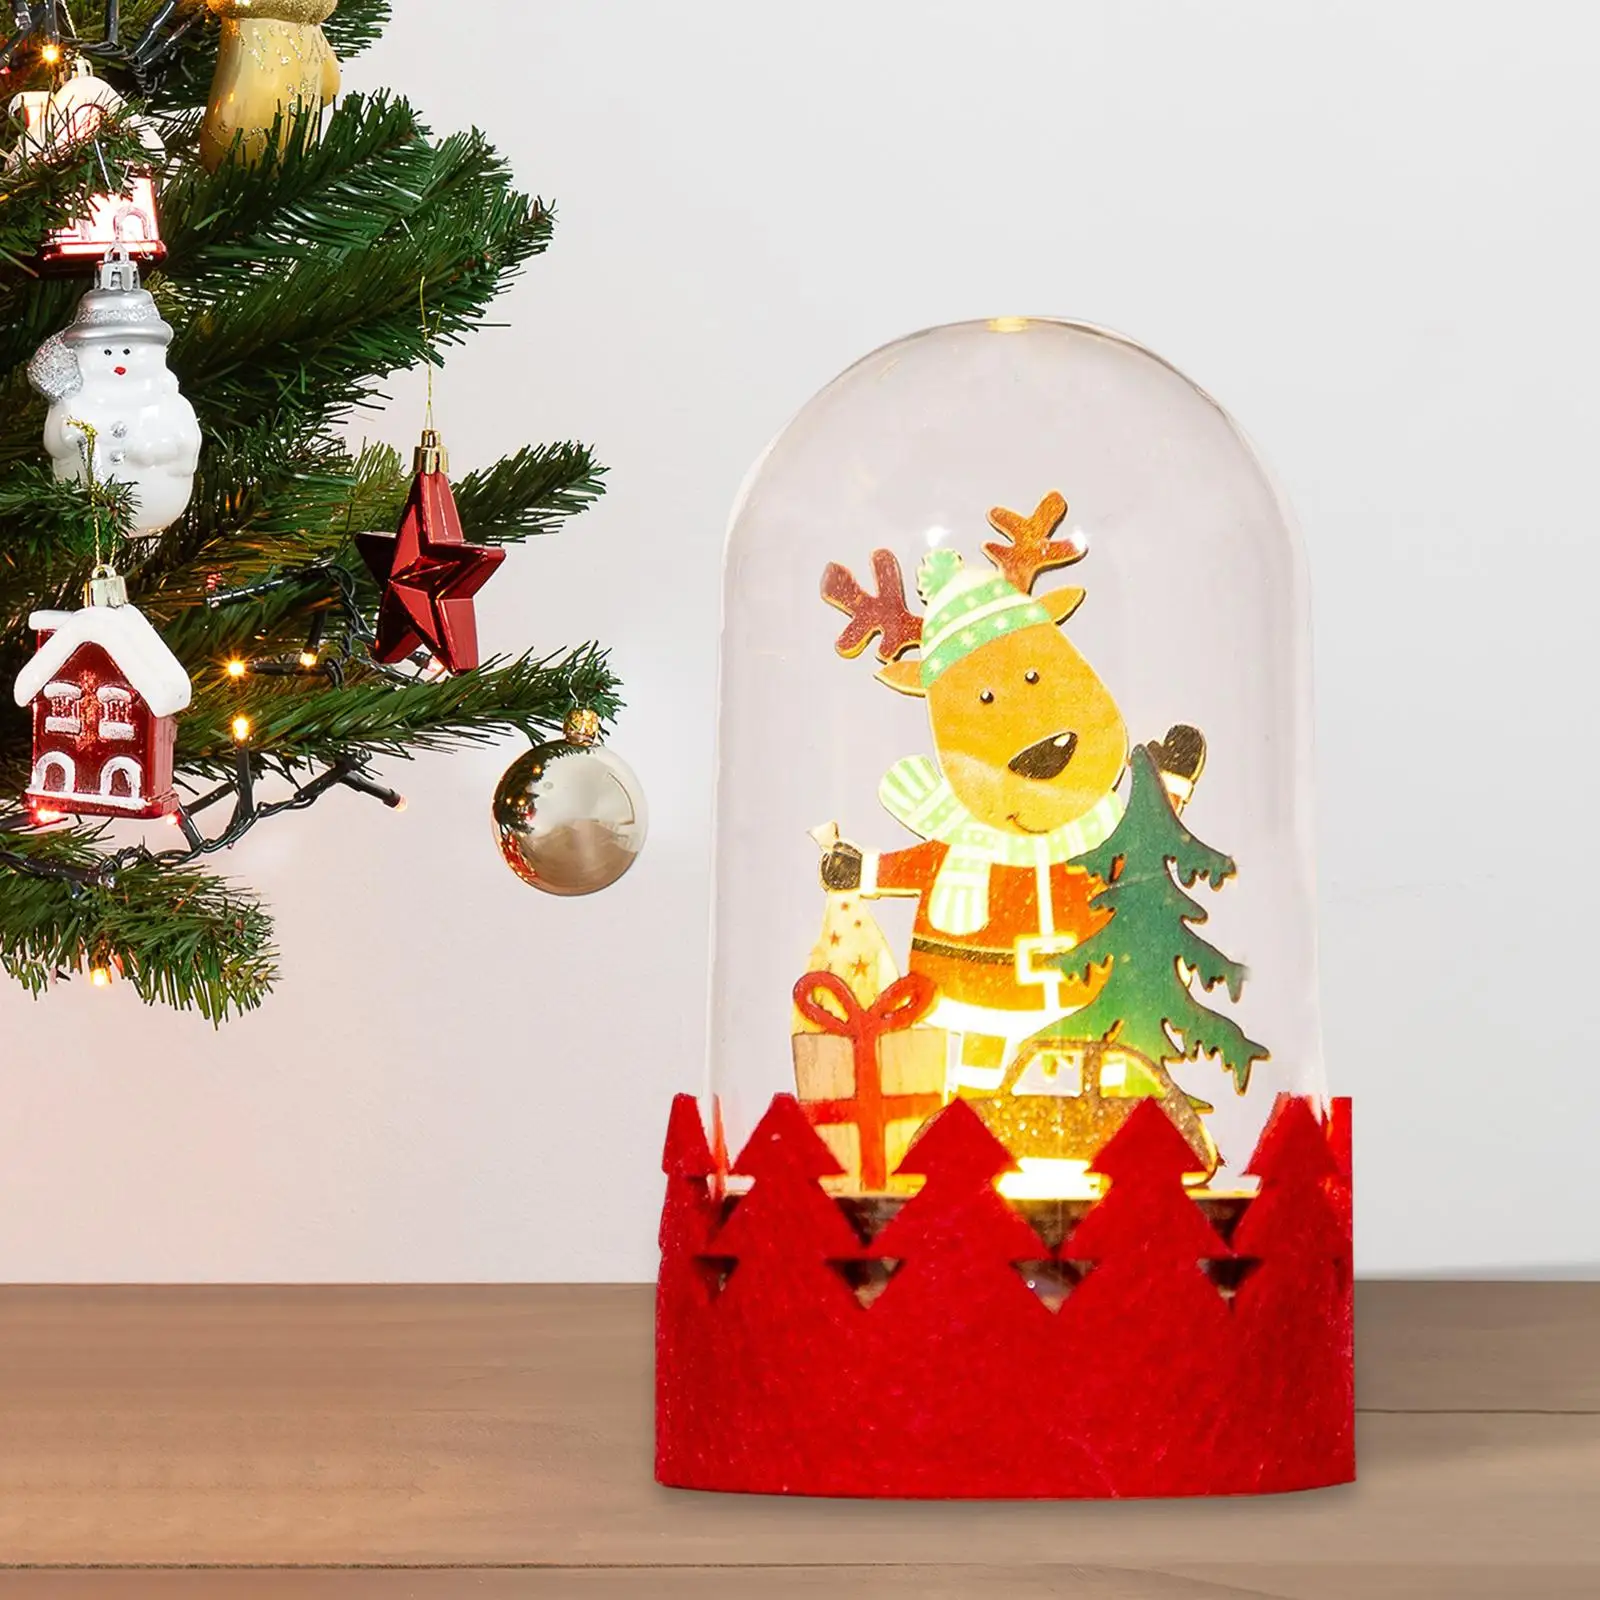 Christmas Lantern Lamp Night Light Battery Operated Decorative for Table Living Room Fireplace Decor Kids New Year Gifts